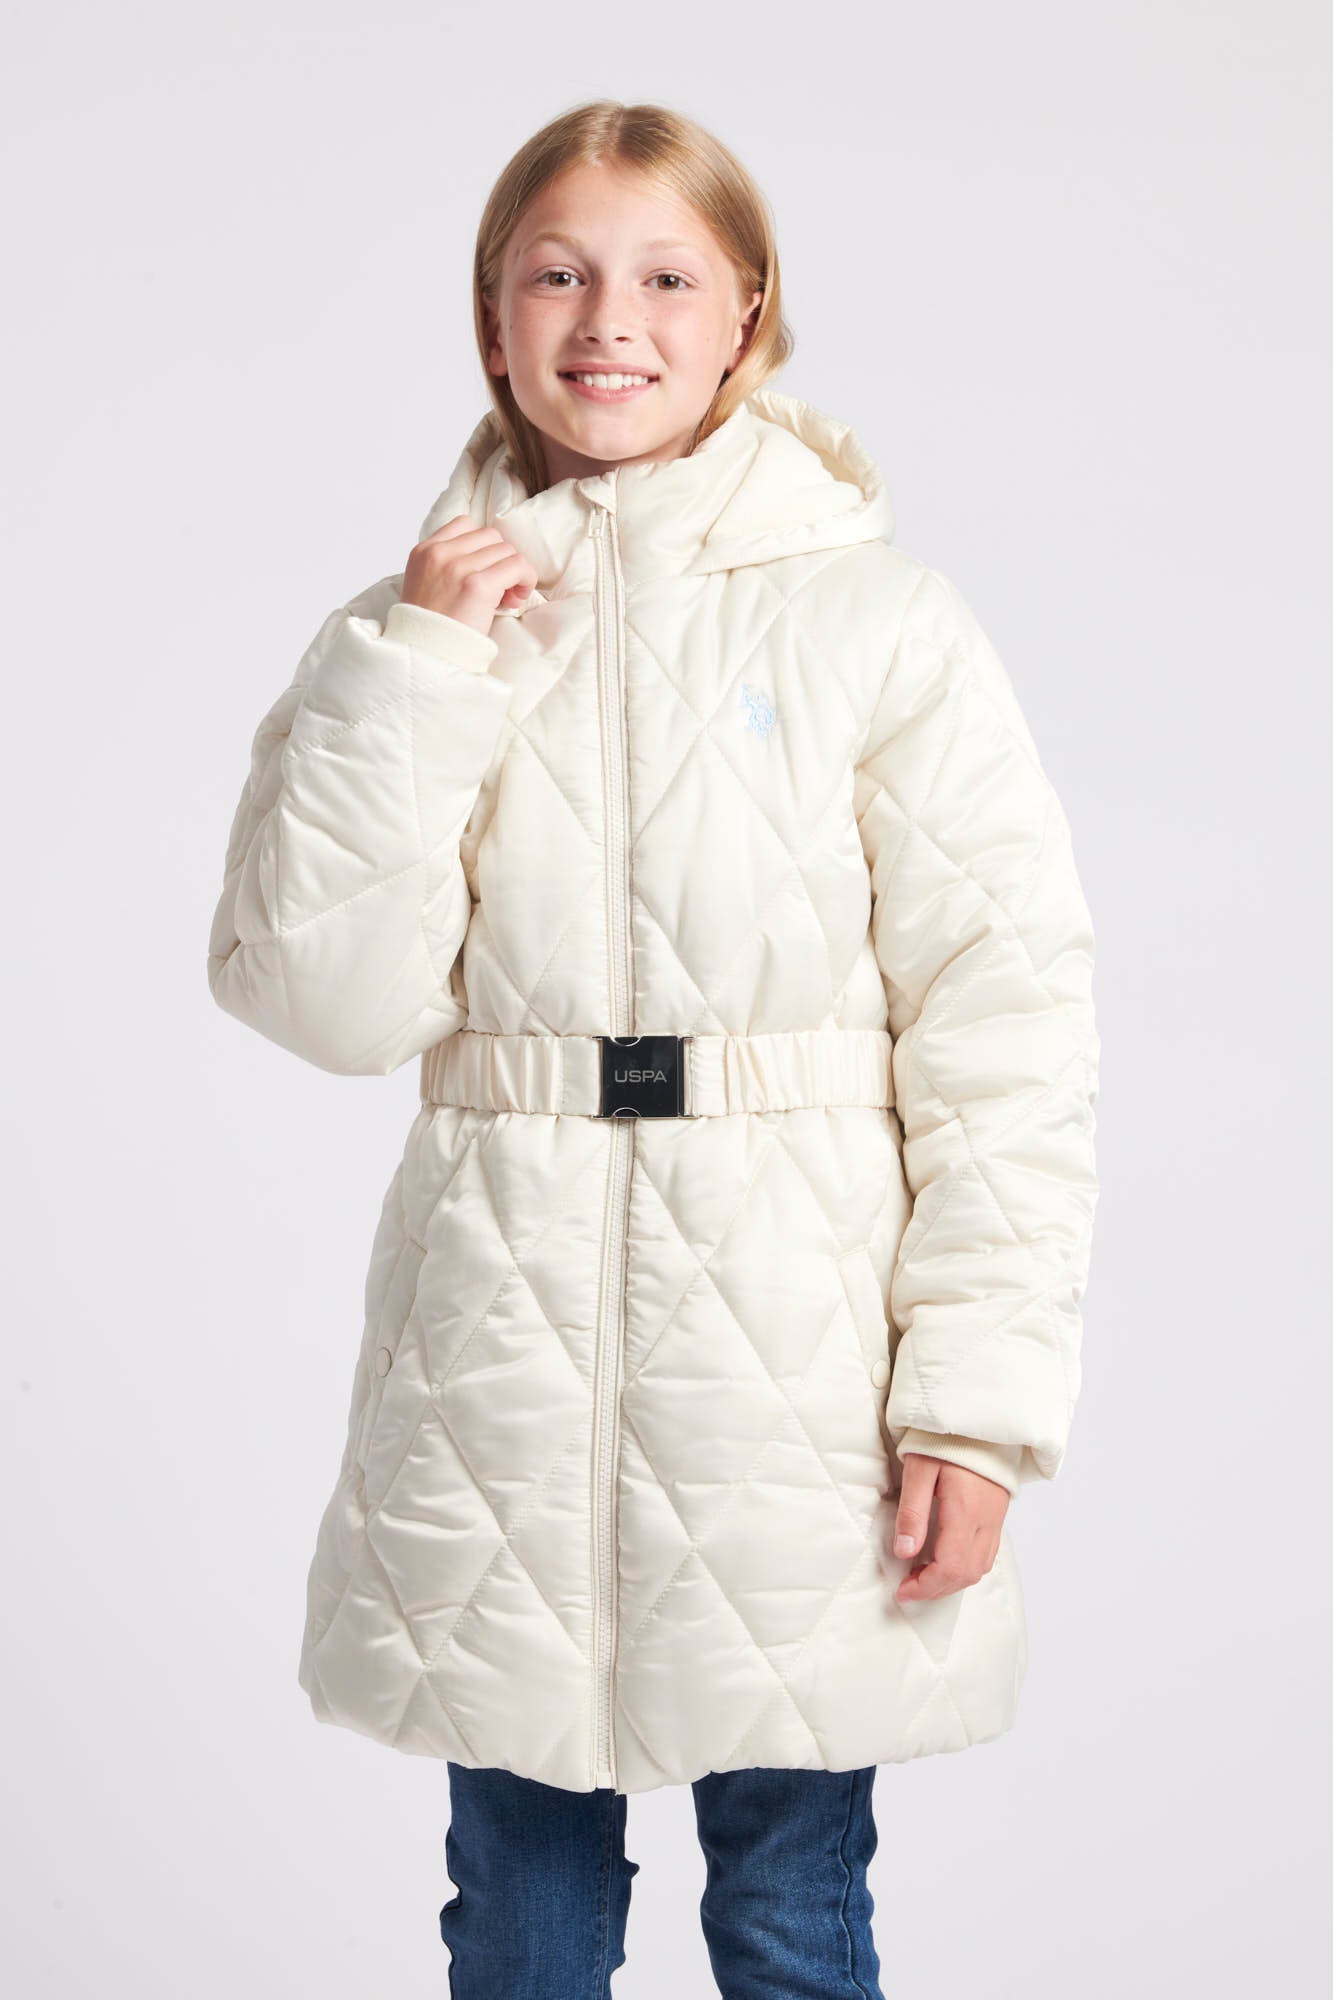 U.S. Polo Assn. Girls Belted Puffer Coat in Turtle Dove